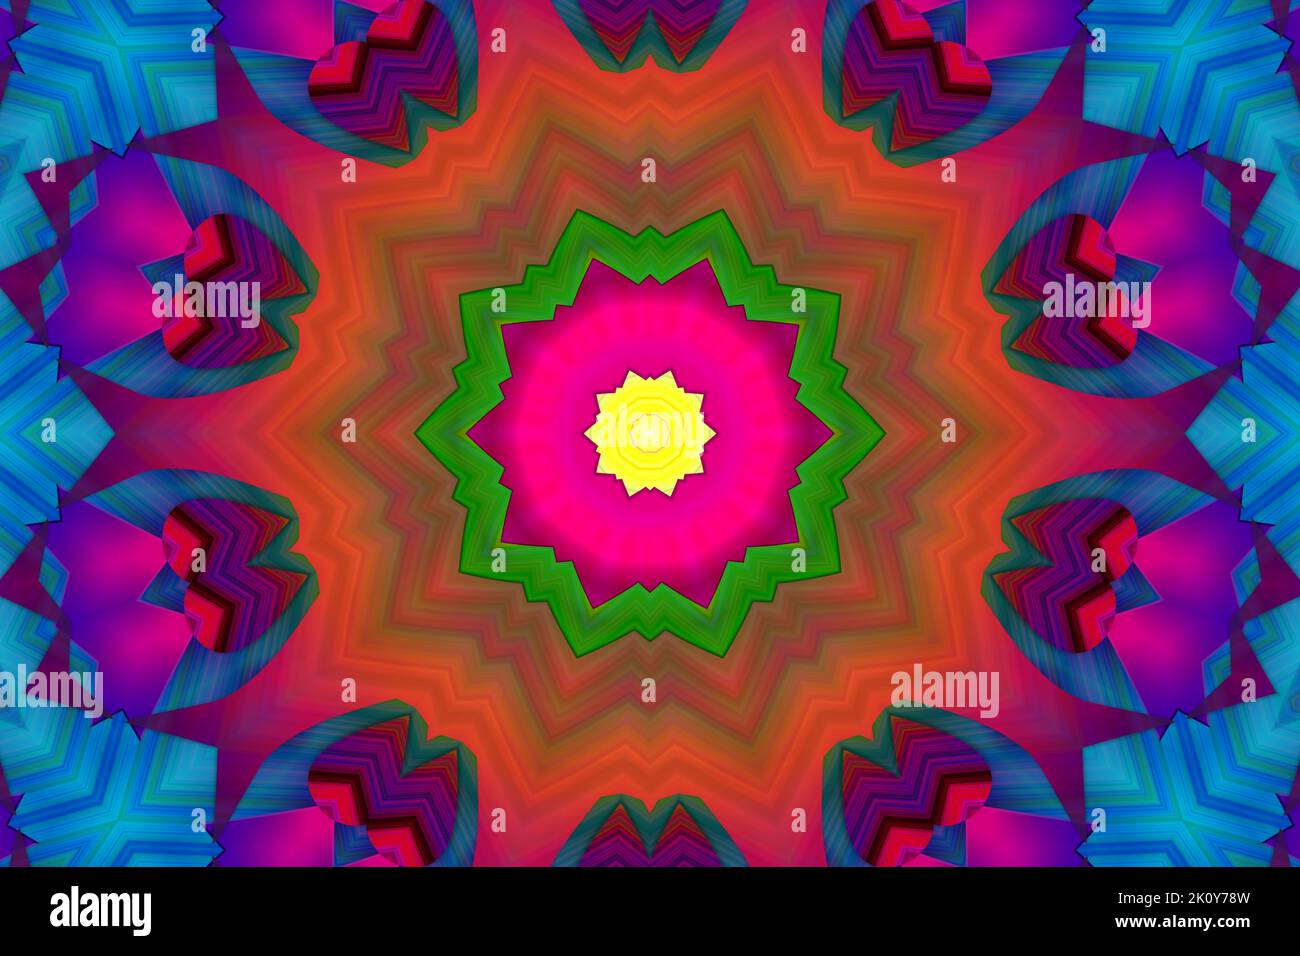 Digital art, 3d illustration. Abstract bright and colorful symmetrical seamless background pattern Stock Photo